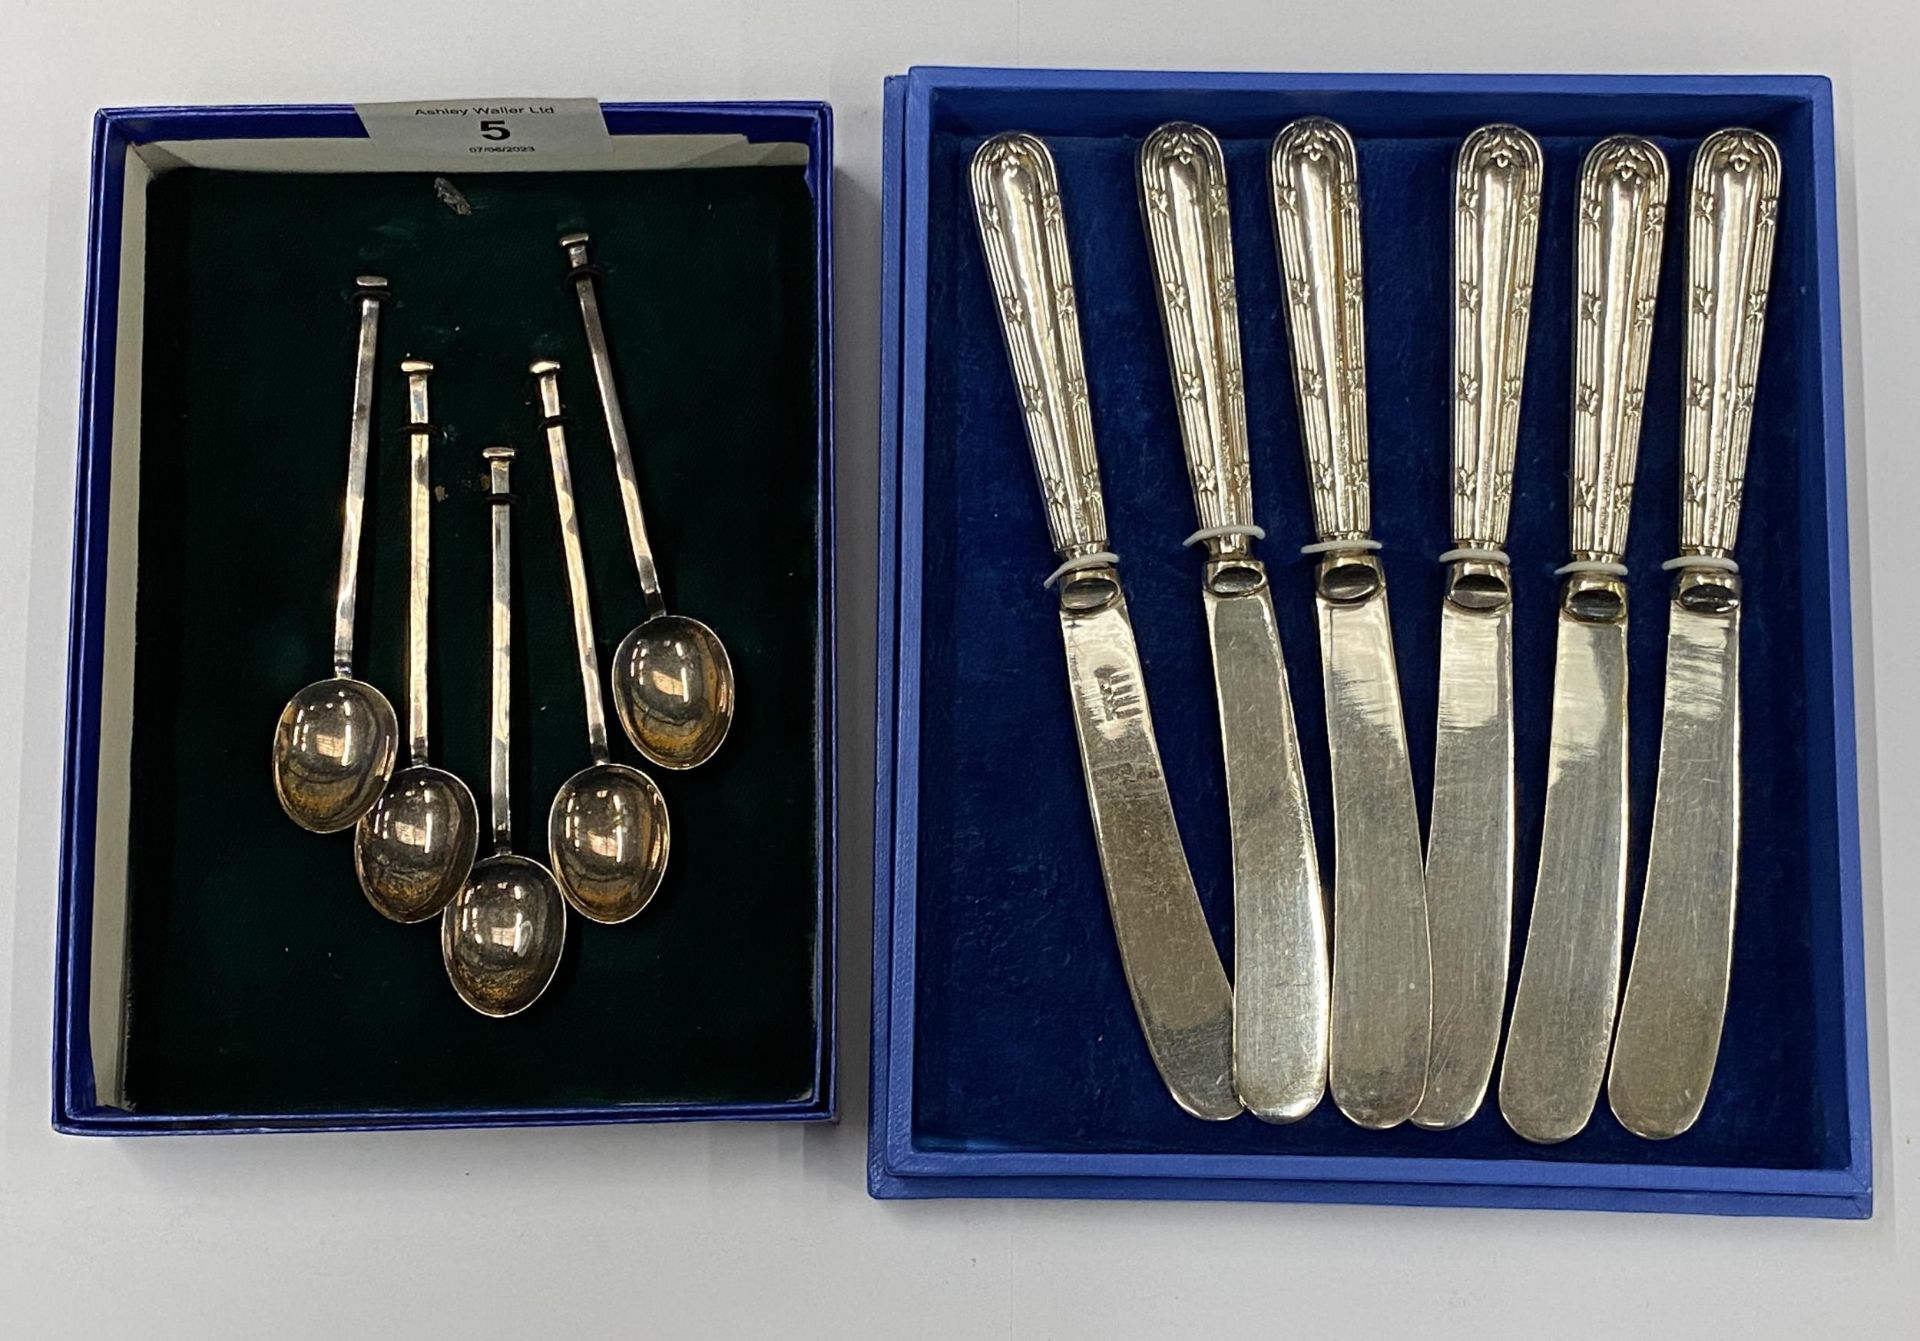 TWO BOXED SILVER ITEMS - FIVE COFFEE SPOONS AND SIX HALLMARKED SILVER HANDLED BUTTER KNIVES